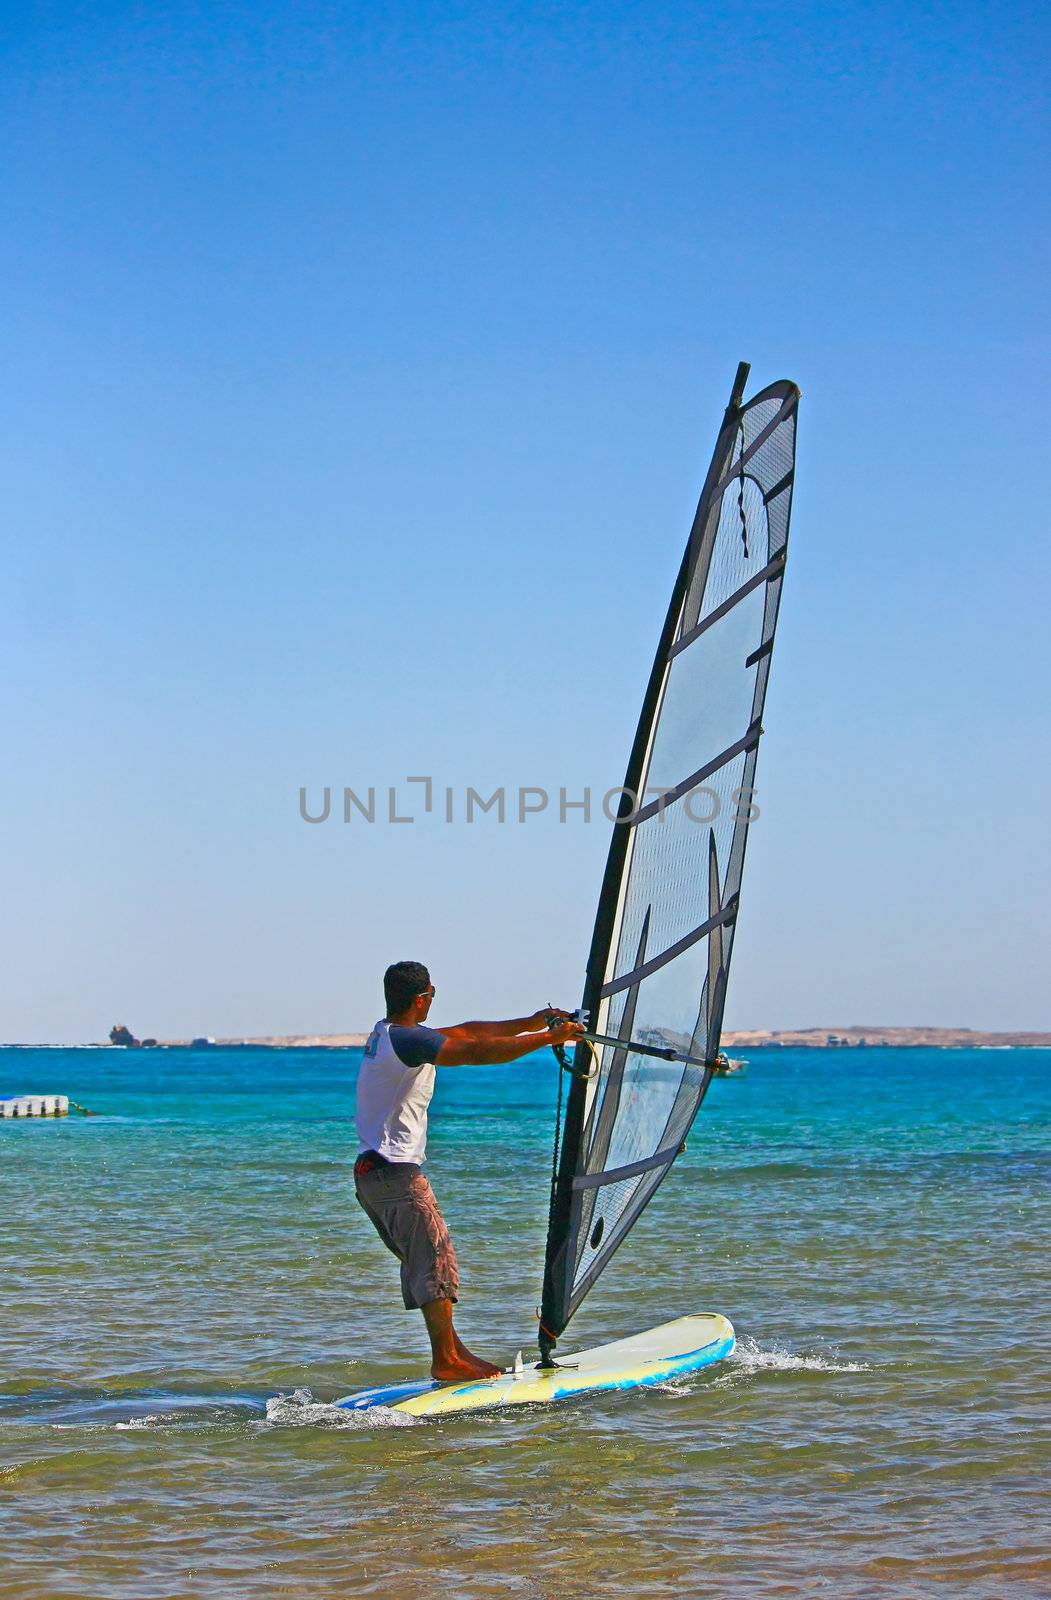 Egypt. Fast moving windsurfing on the background of the sea.